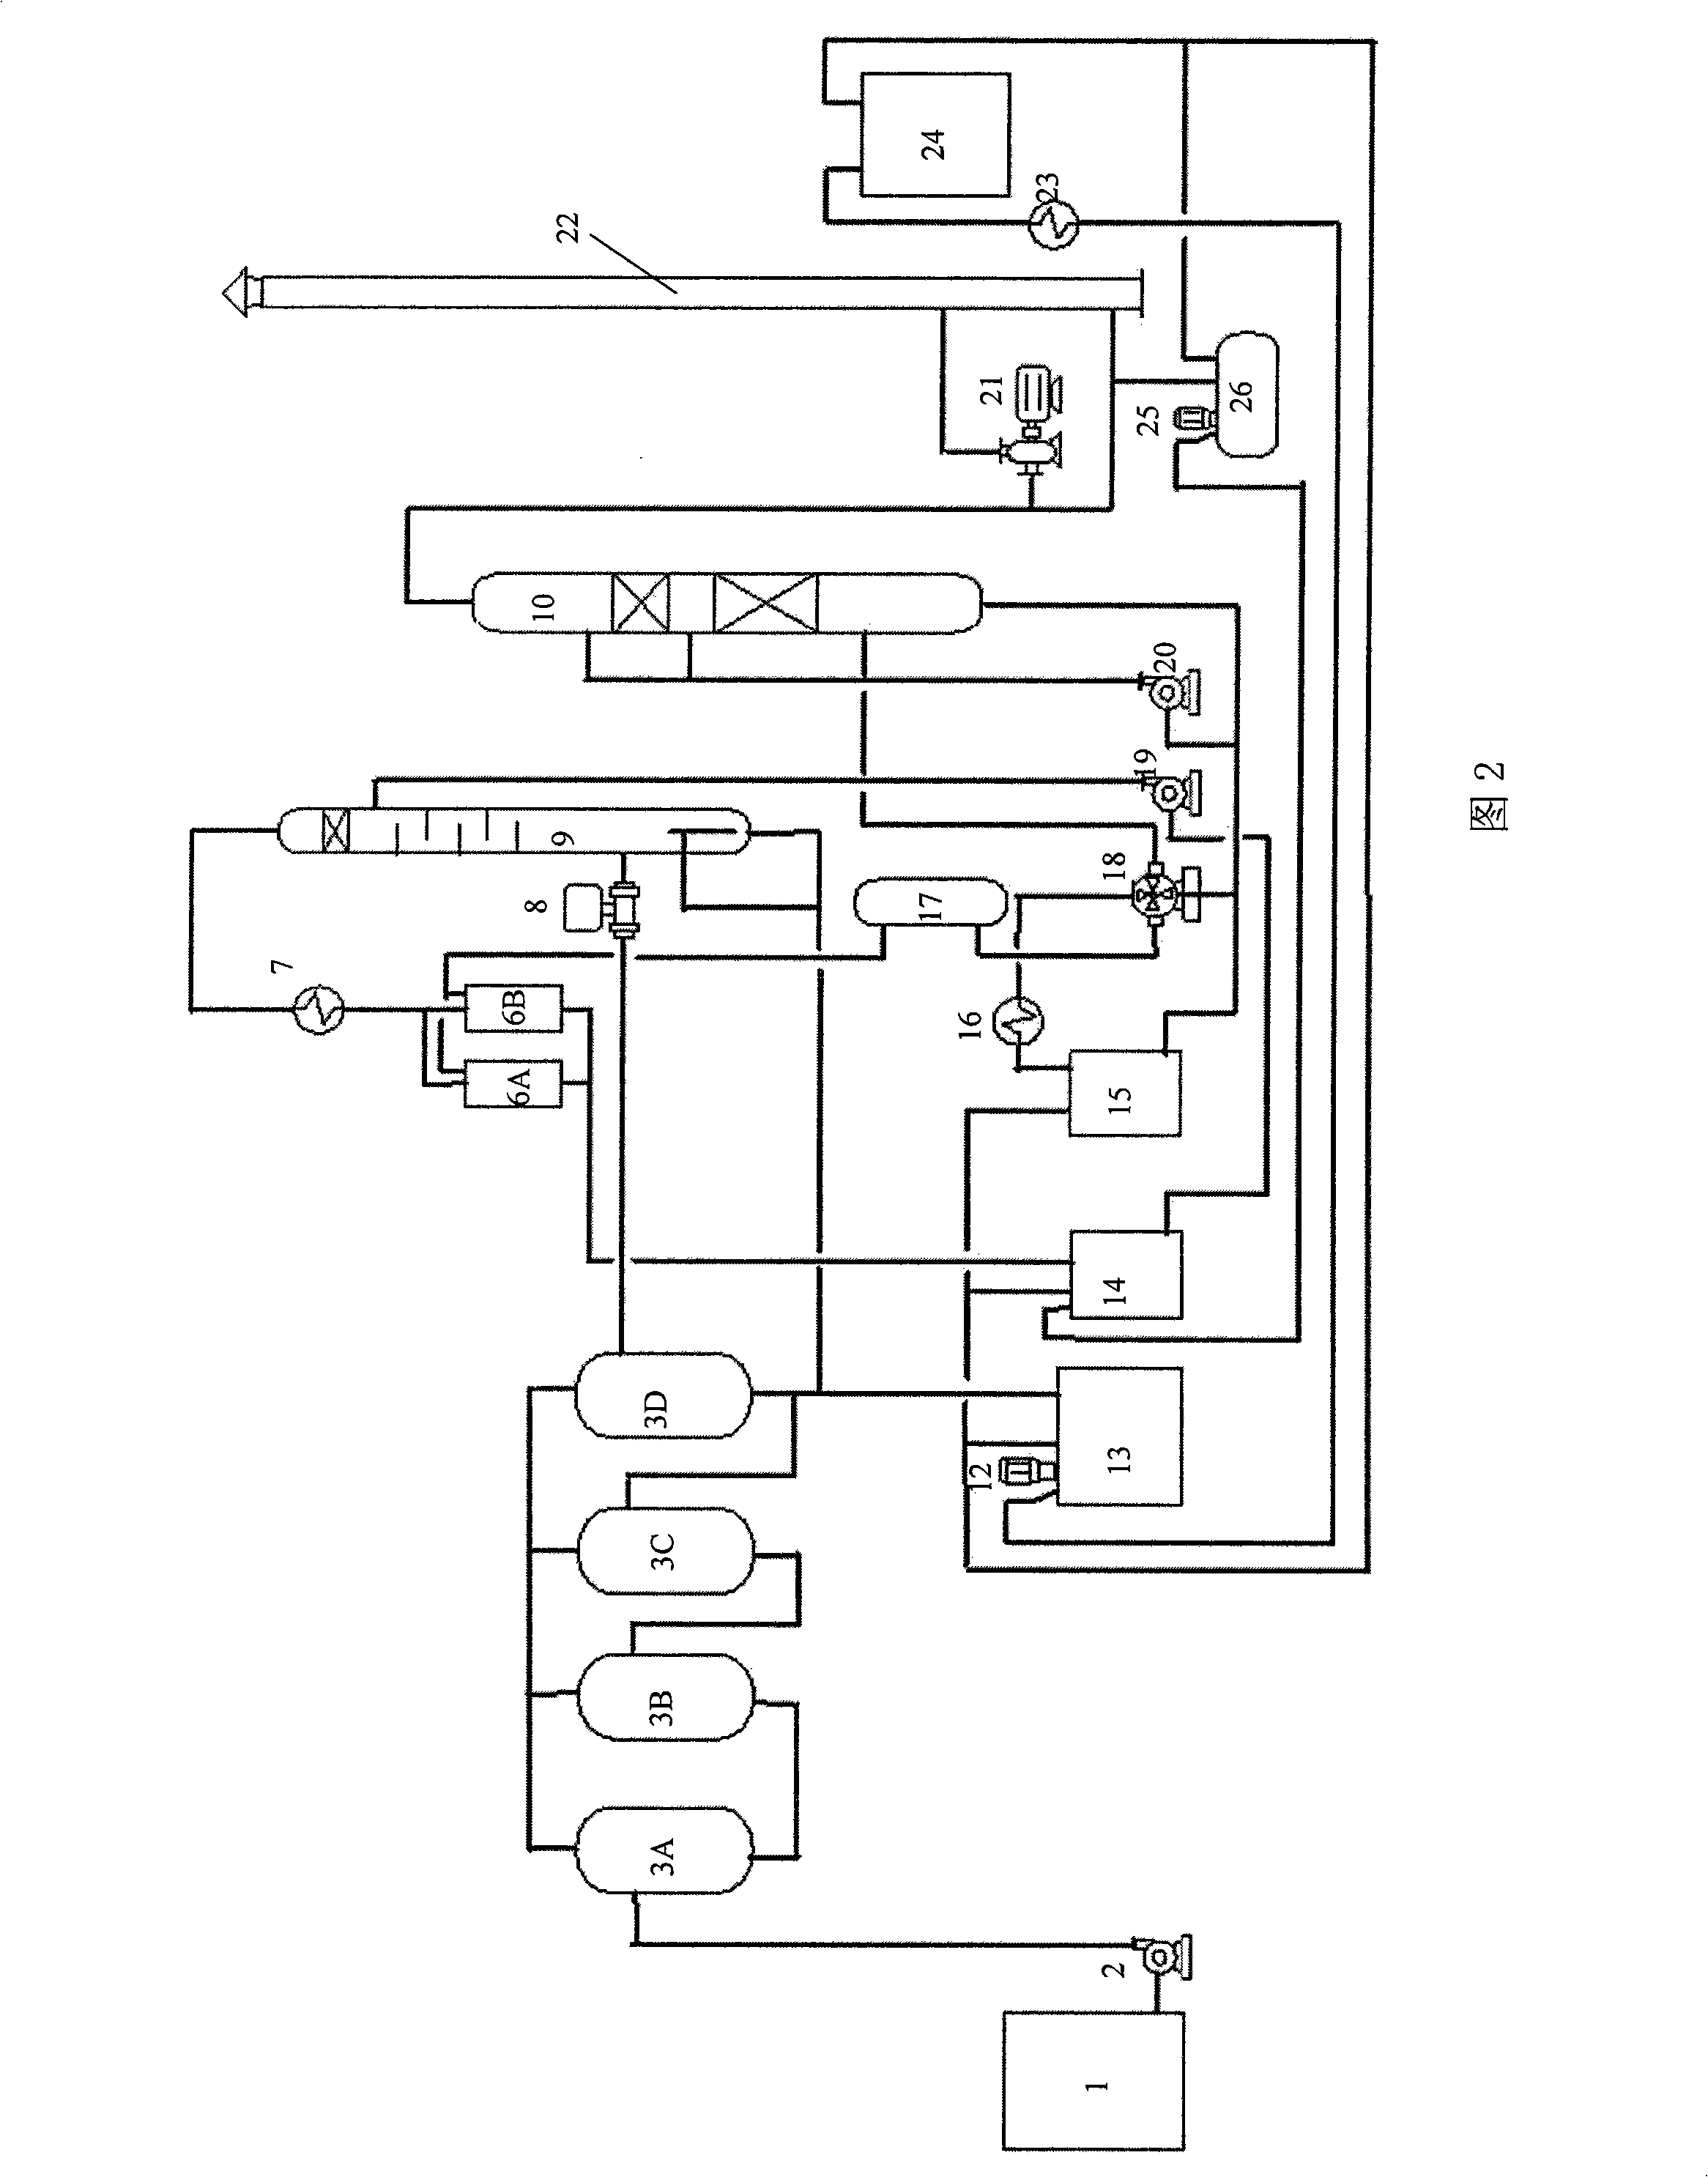 Process for producing moderate temperature modified bitumen by continuously pressurizing and hot-polymerizing at two stages connected in series